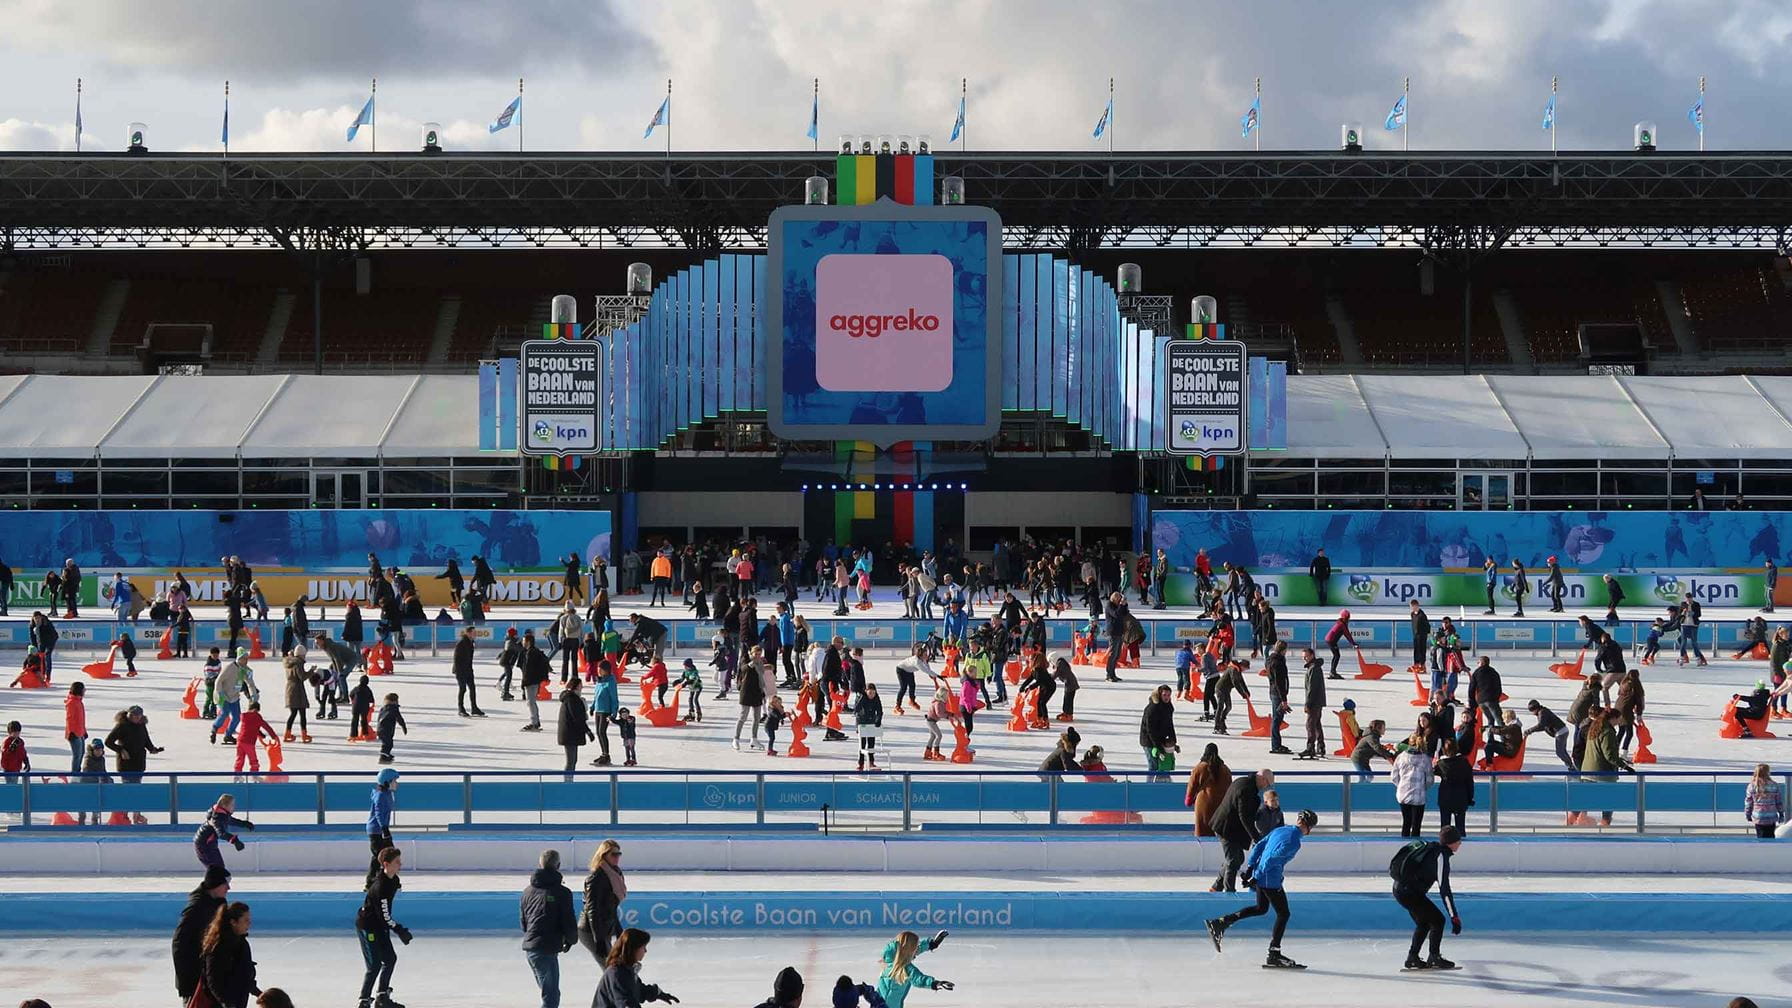 The Coolest Ice Rink Of The Netherlands